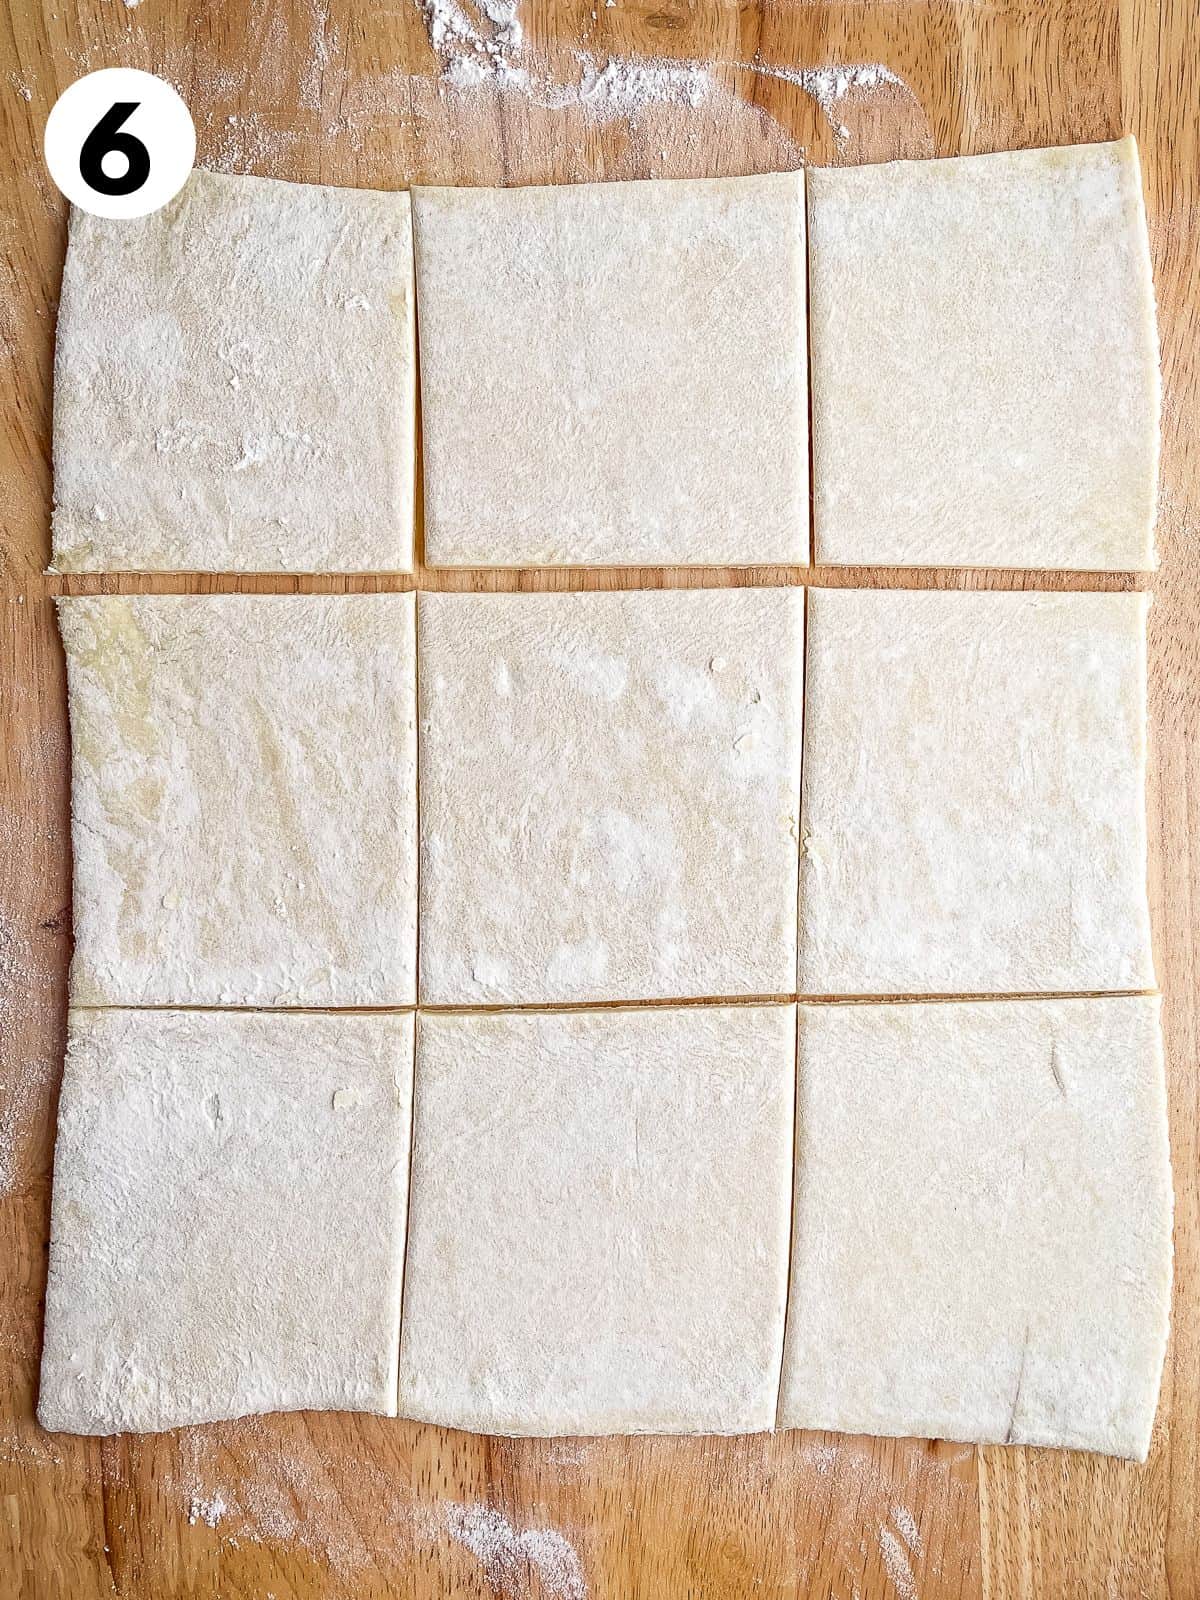 Puff pastry cut into 9 pieces.